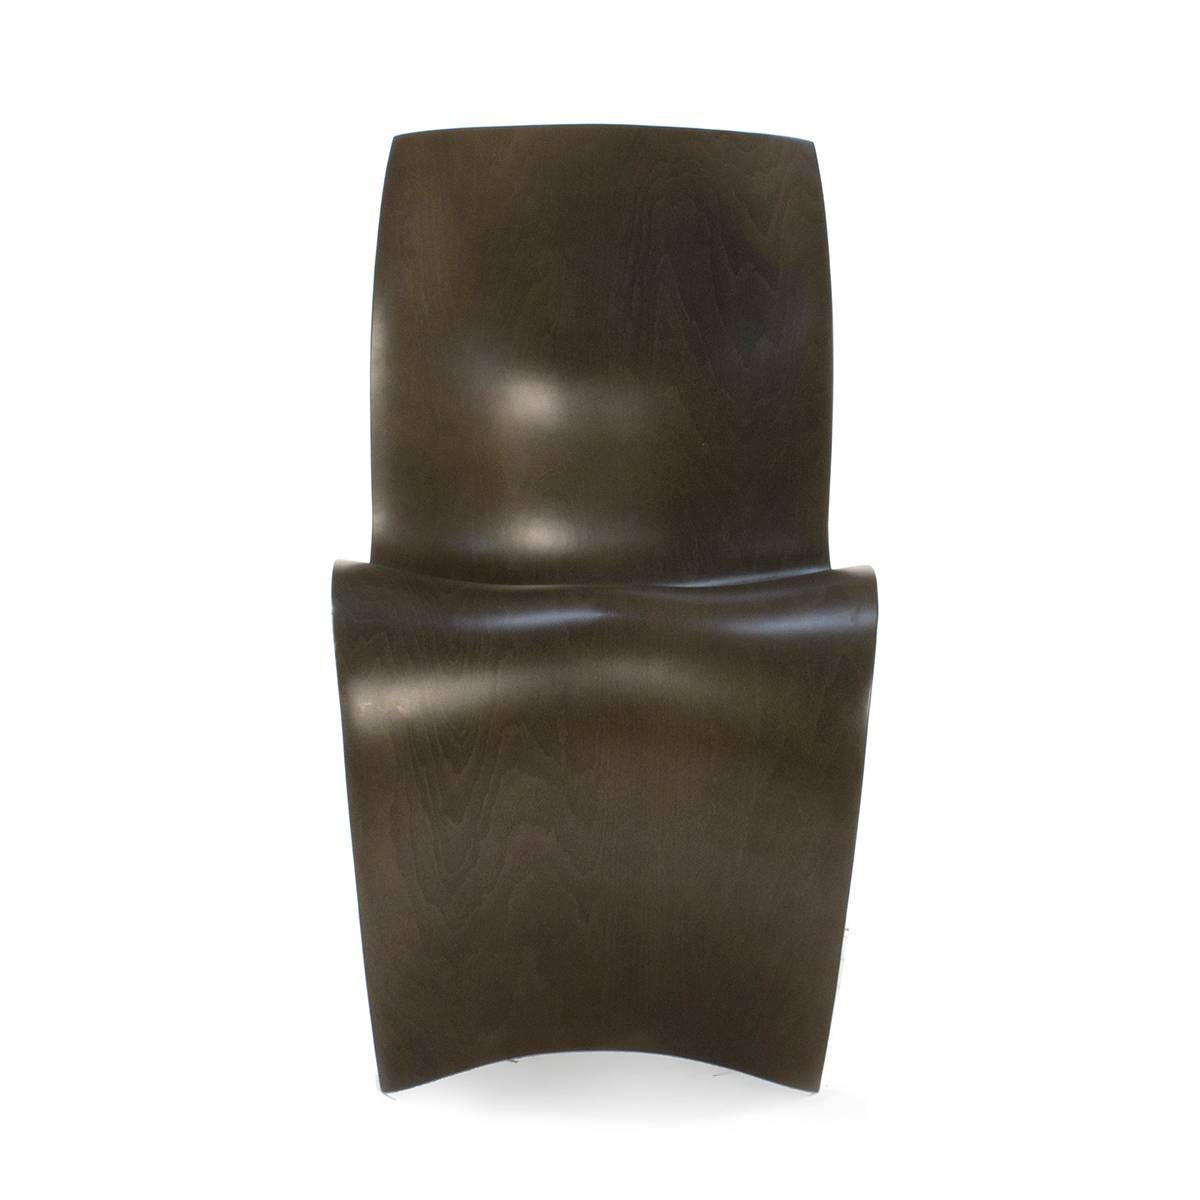 For Moroso, Ron Arad has trod a strongly materials-oriented path, from polyethylene upholstery to wood. His successful Victoria and Albert collection was followed by the Little Albert and The Big E armchairs in polyethylene. The three skin chair was